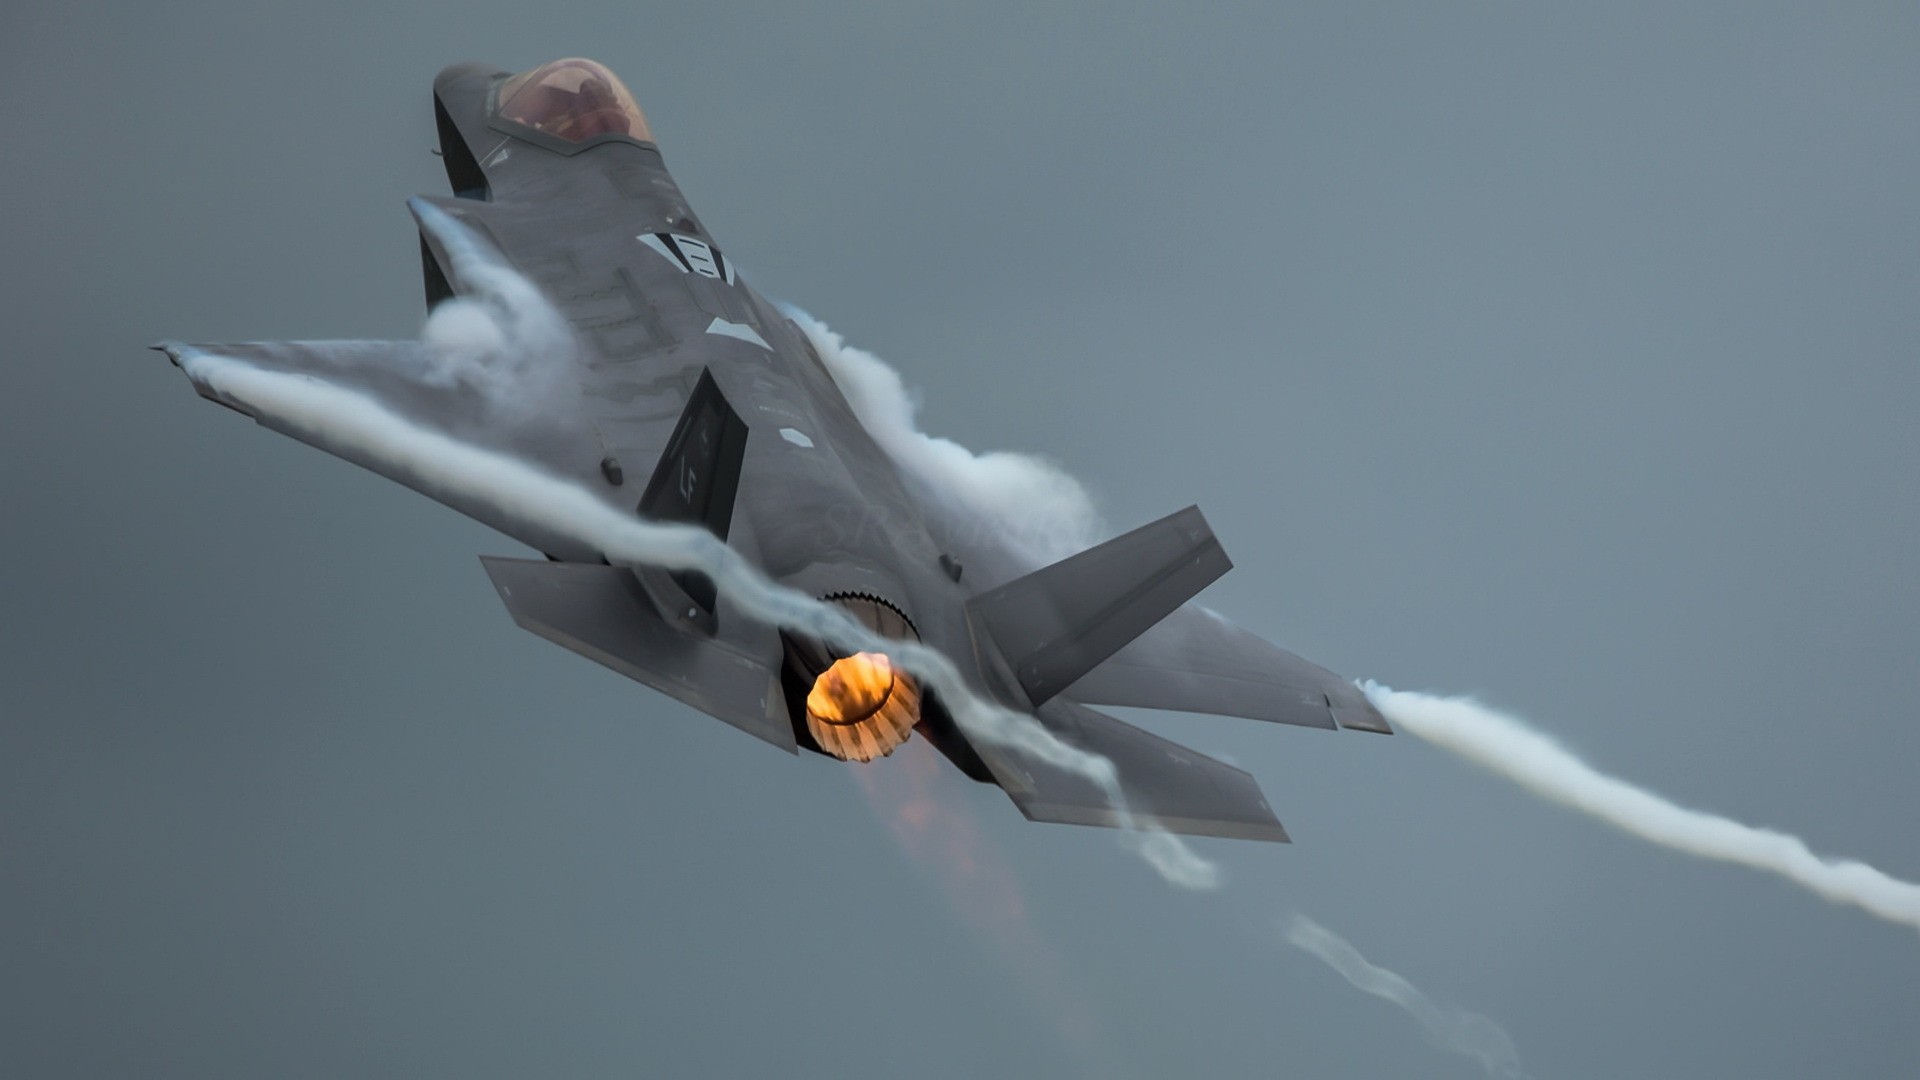 General 1920x1080 military military aircraft Lockheed Martin F-35 Lightning II vehicle military vehicle jet fighter condensation wingtip vortices American aircraft aircraft smoke Lockheed Martin